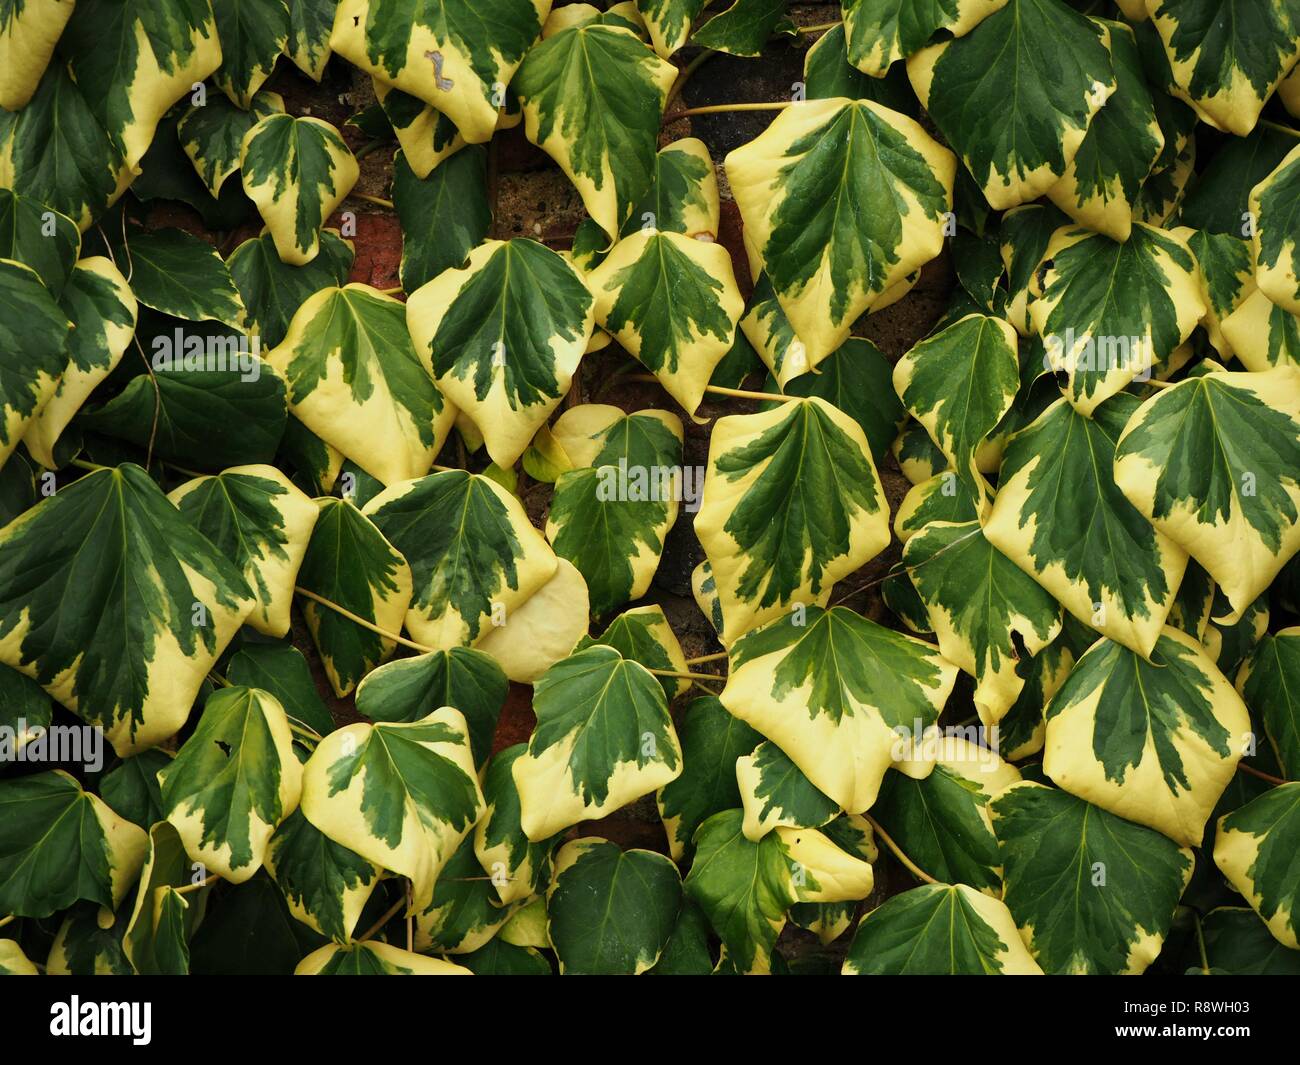 Large variegated green and yellow ivy leaves growing against a wall Stock Photo